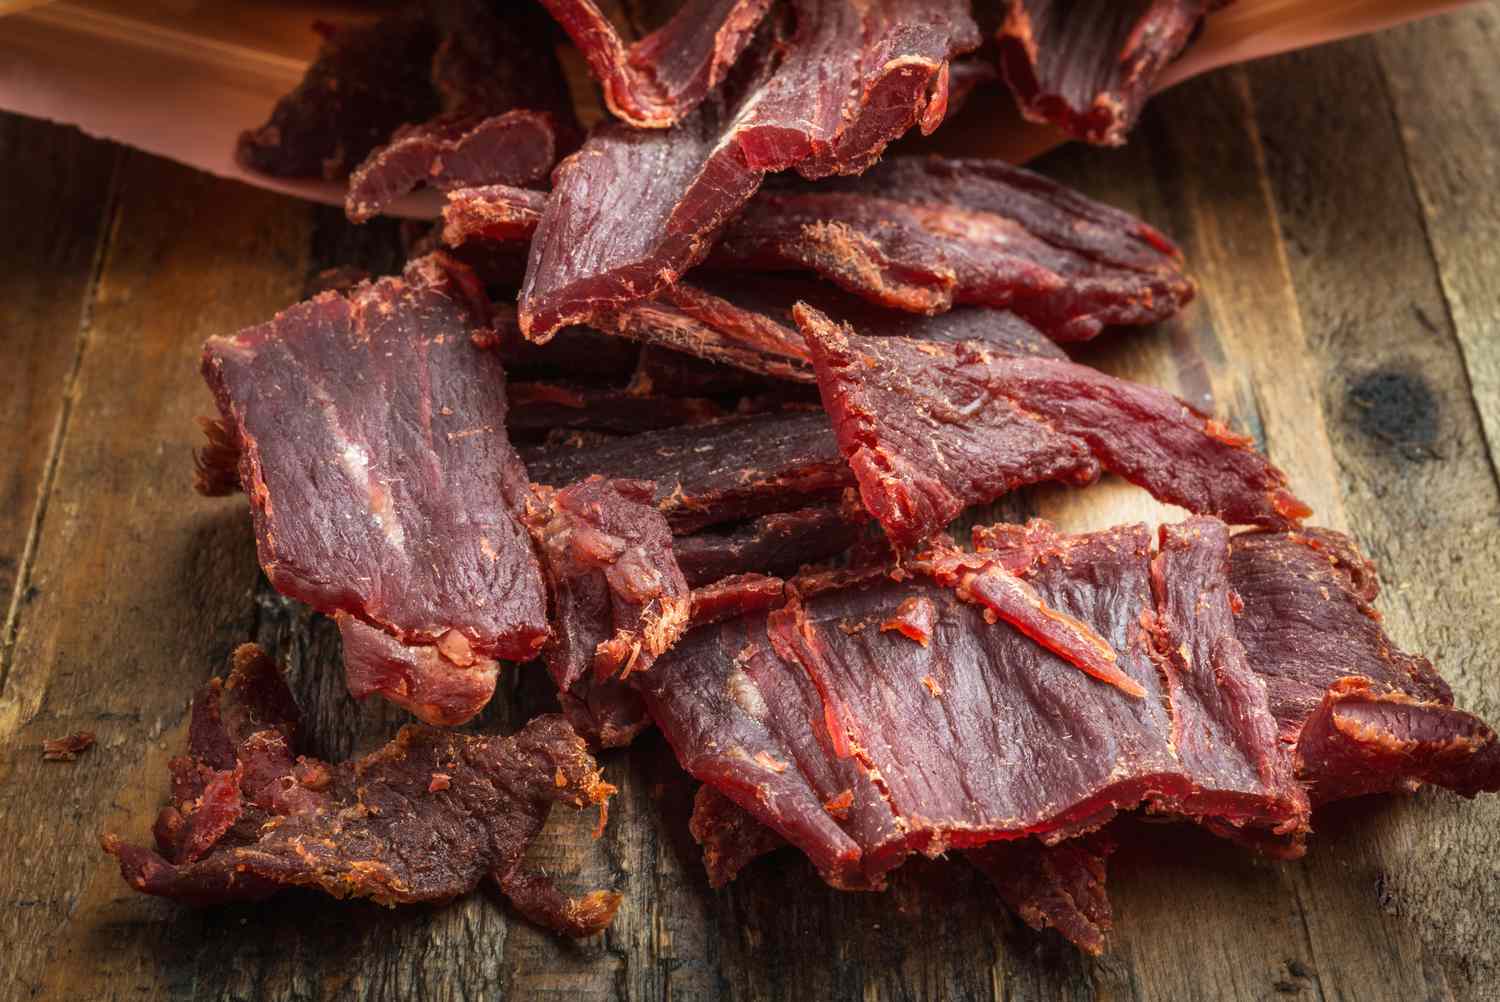 Large strips of jerky on a wooden surface